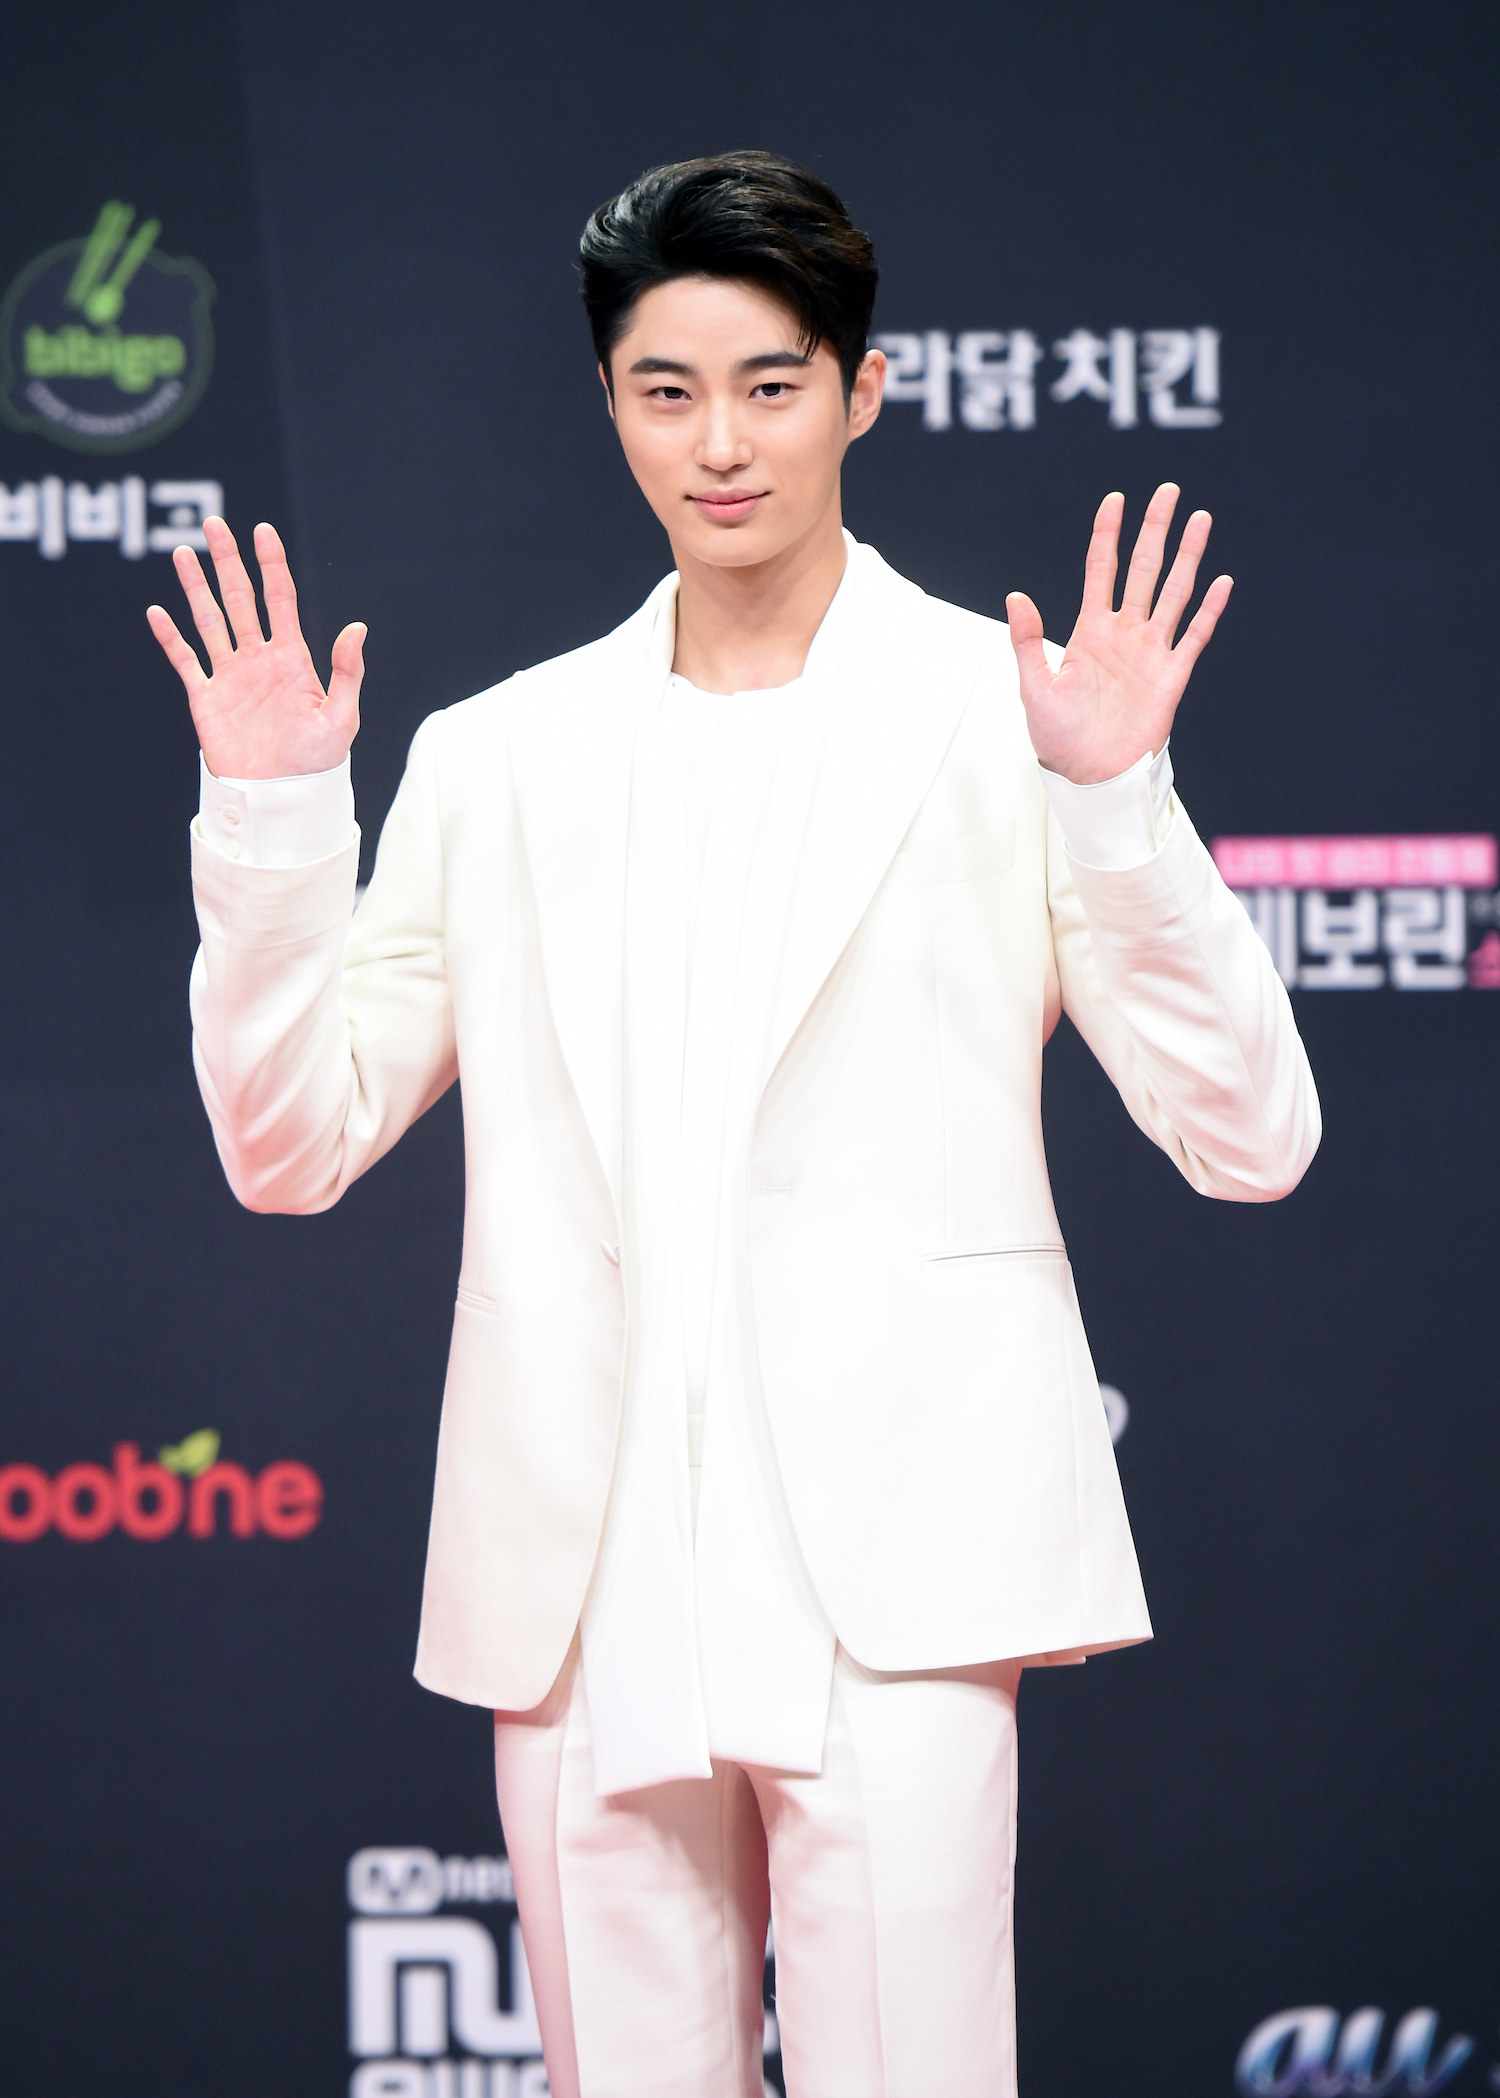 Byeon Woo Seok wears a suit  at the 2020 Mnet Asian Music Awards